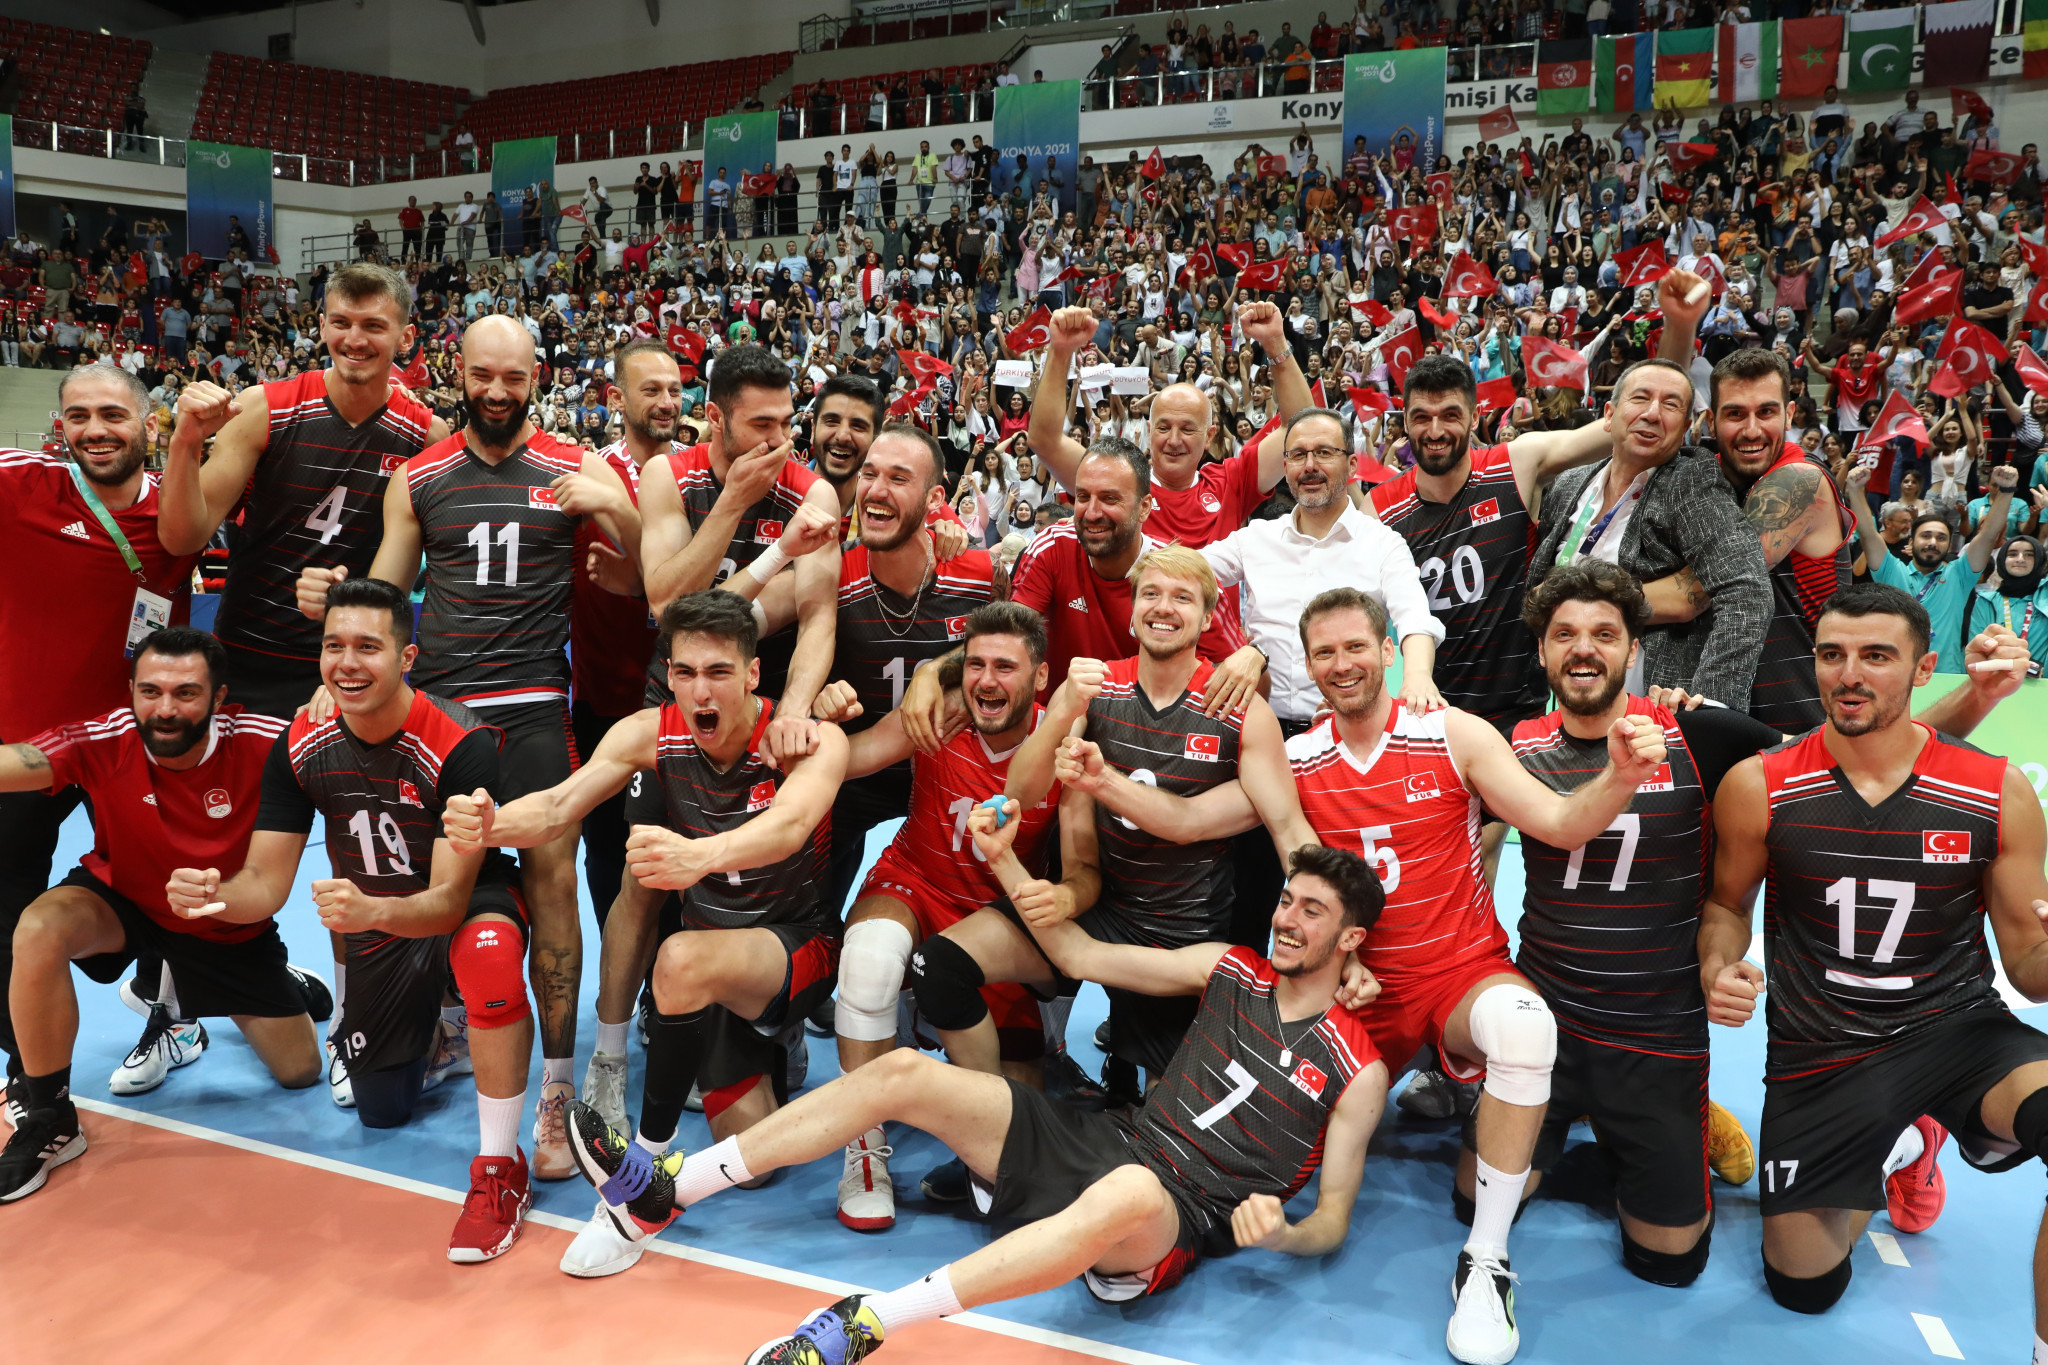 Turkish players celebrate after beating Iran 3-2 in a group decider to advance to the men's volleyball semi-finals ©Konya 2021